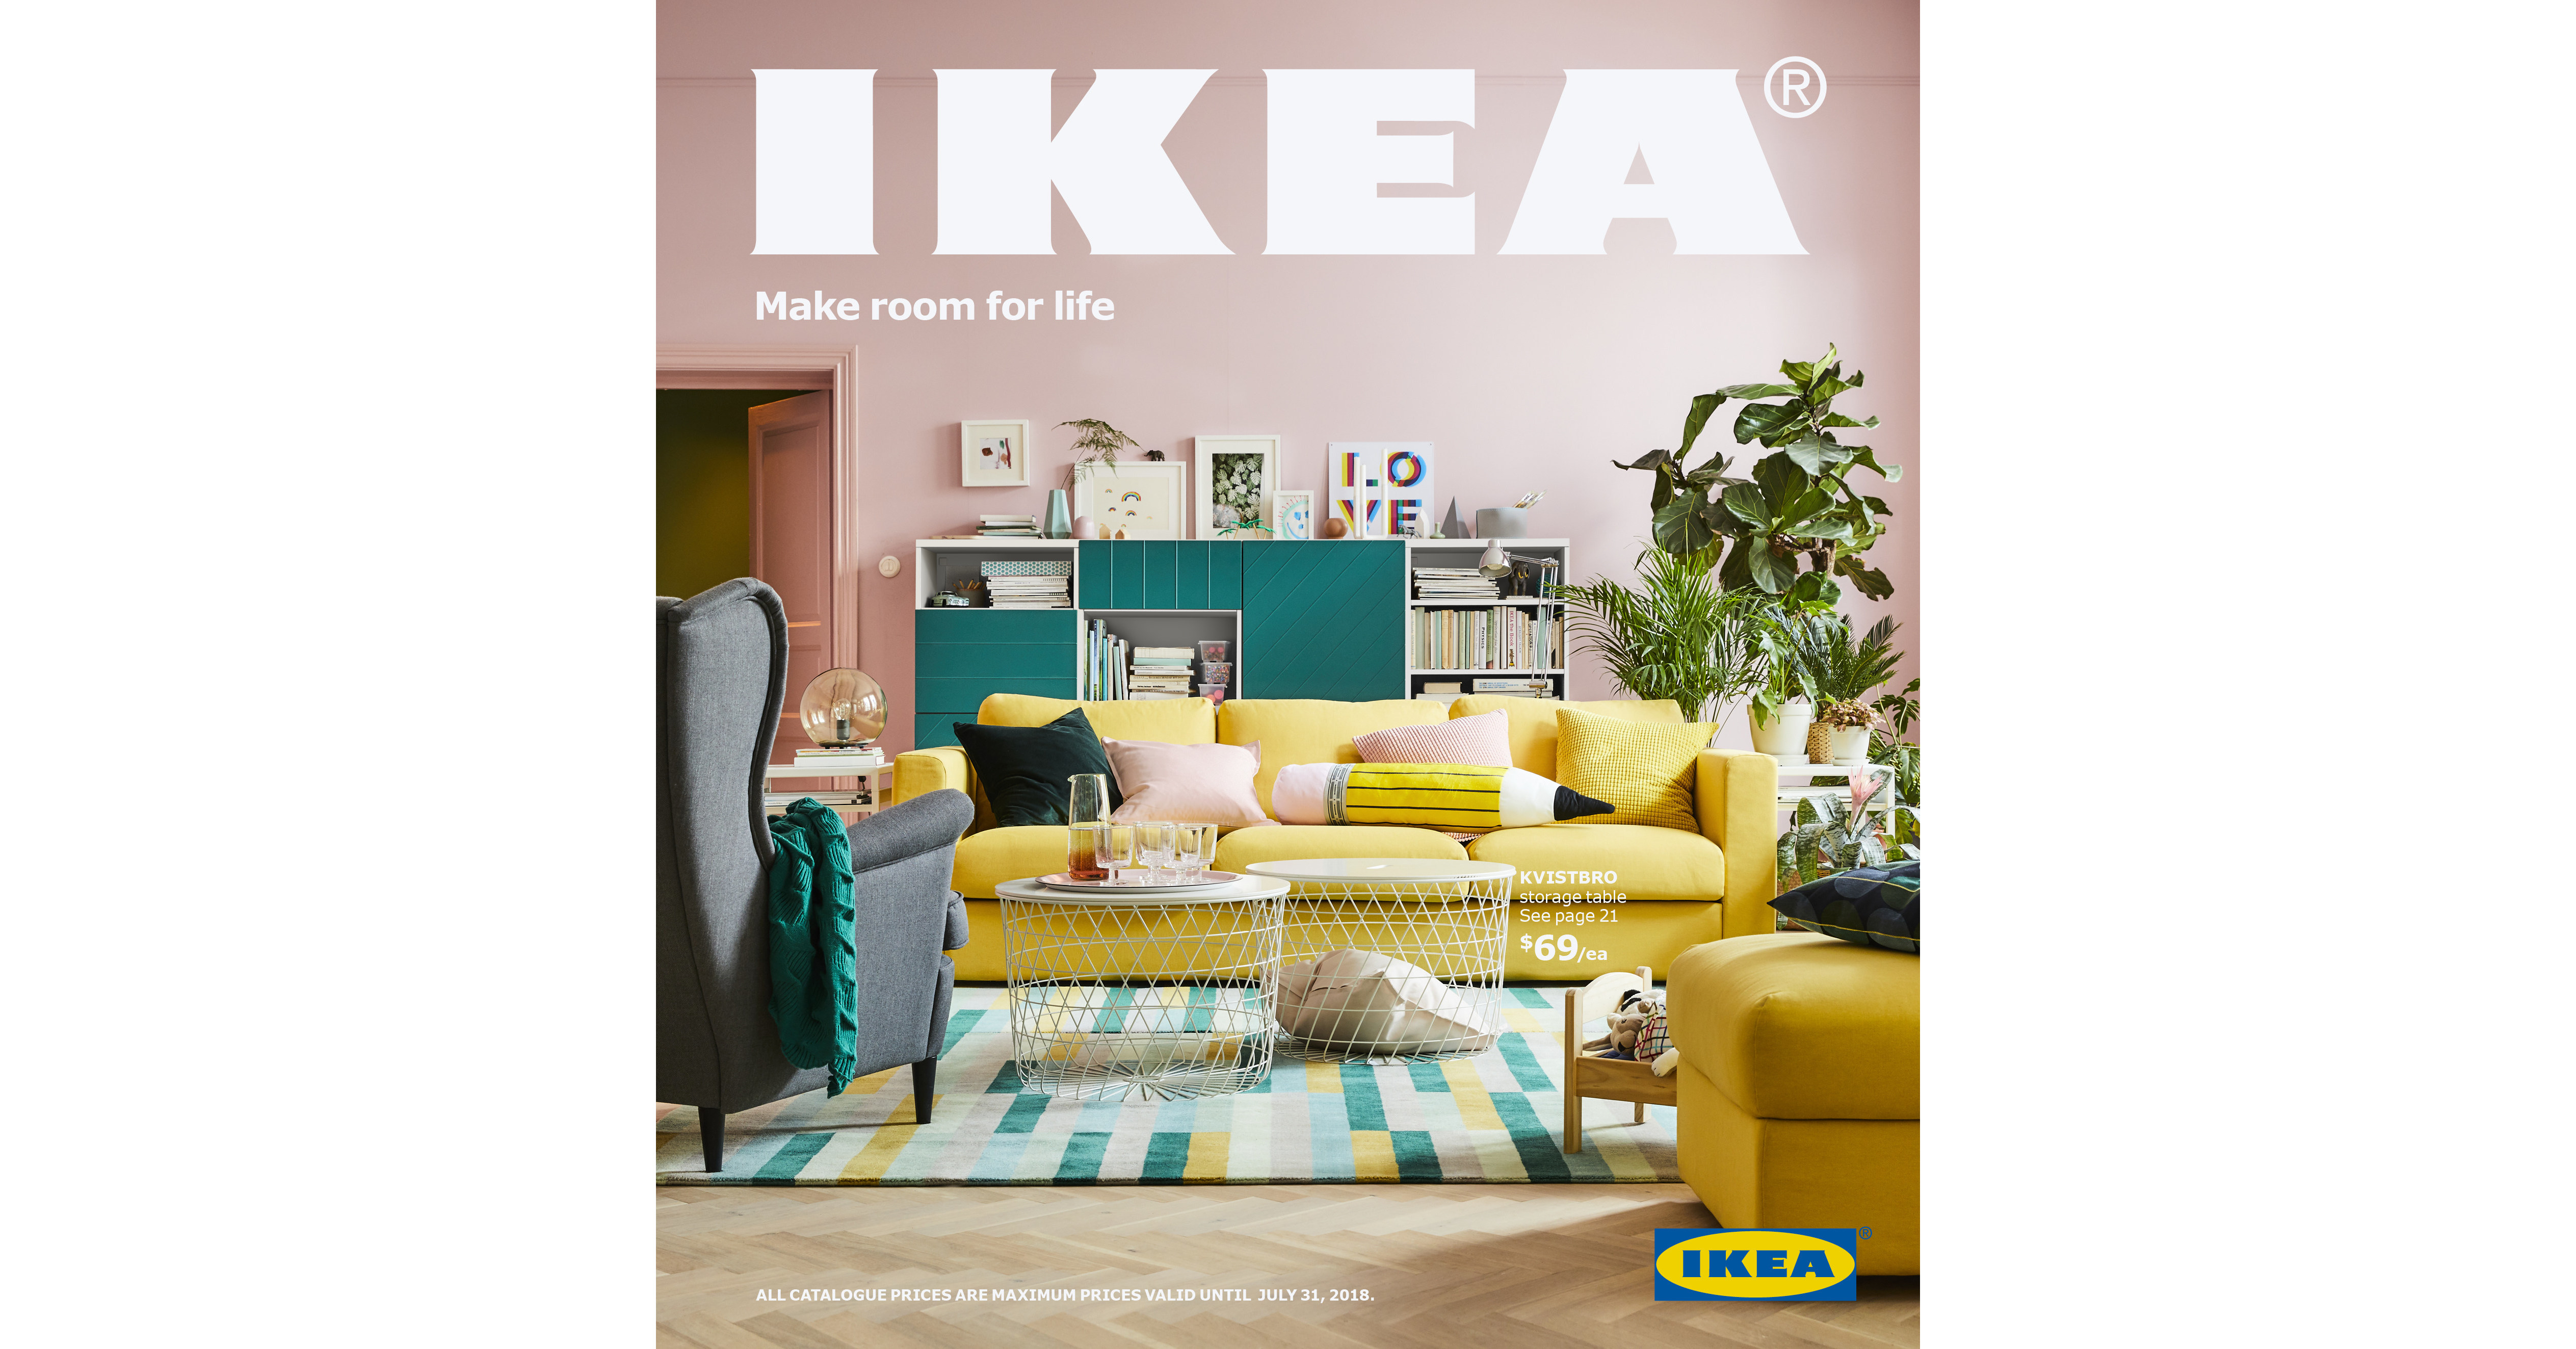 2022 IKEA Catalogue Set to Land in Mailboxes Across Canada